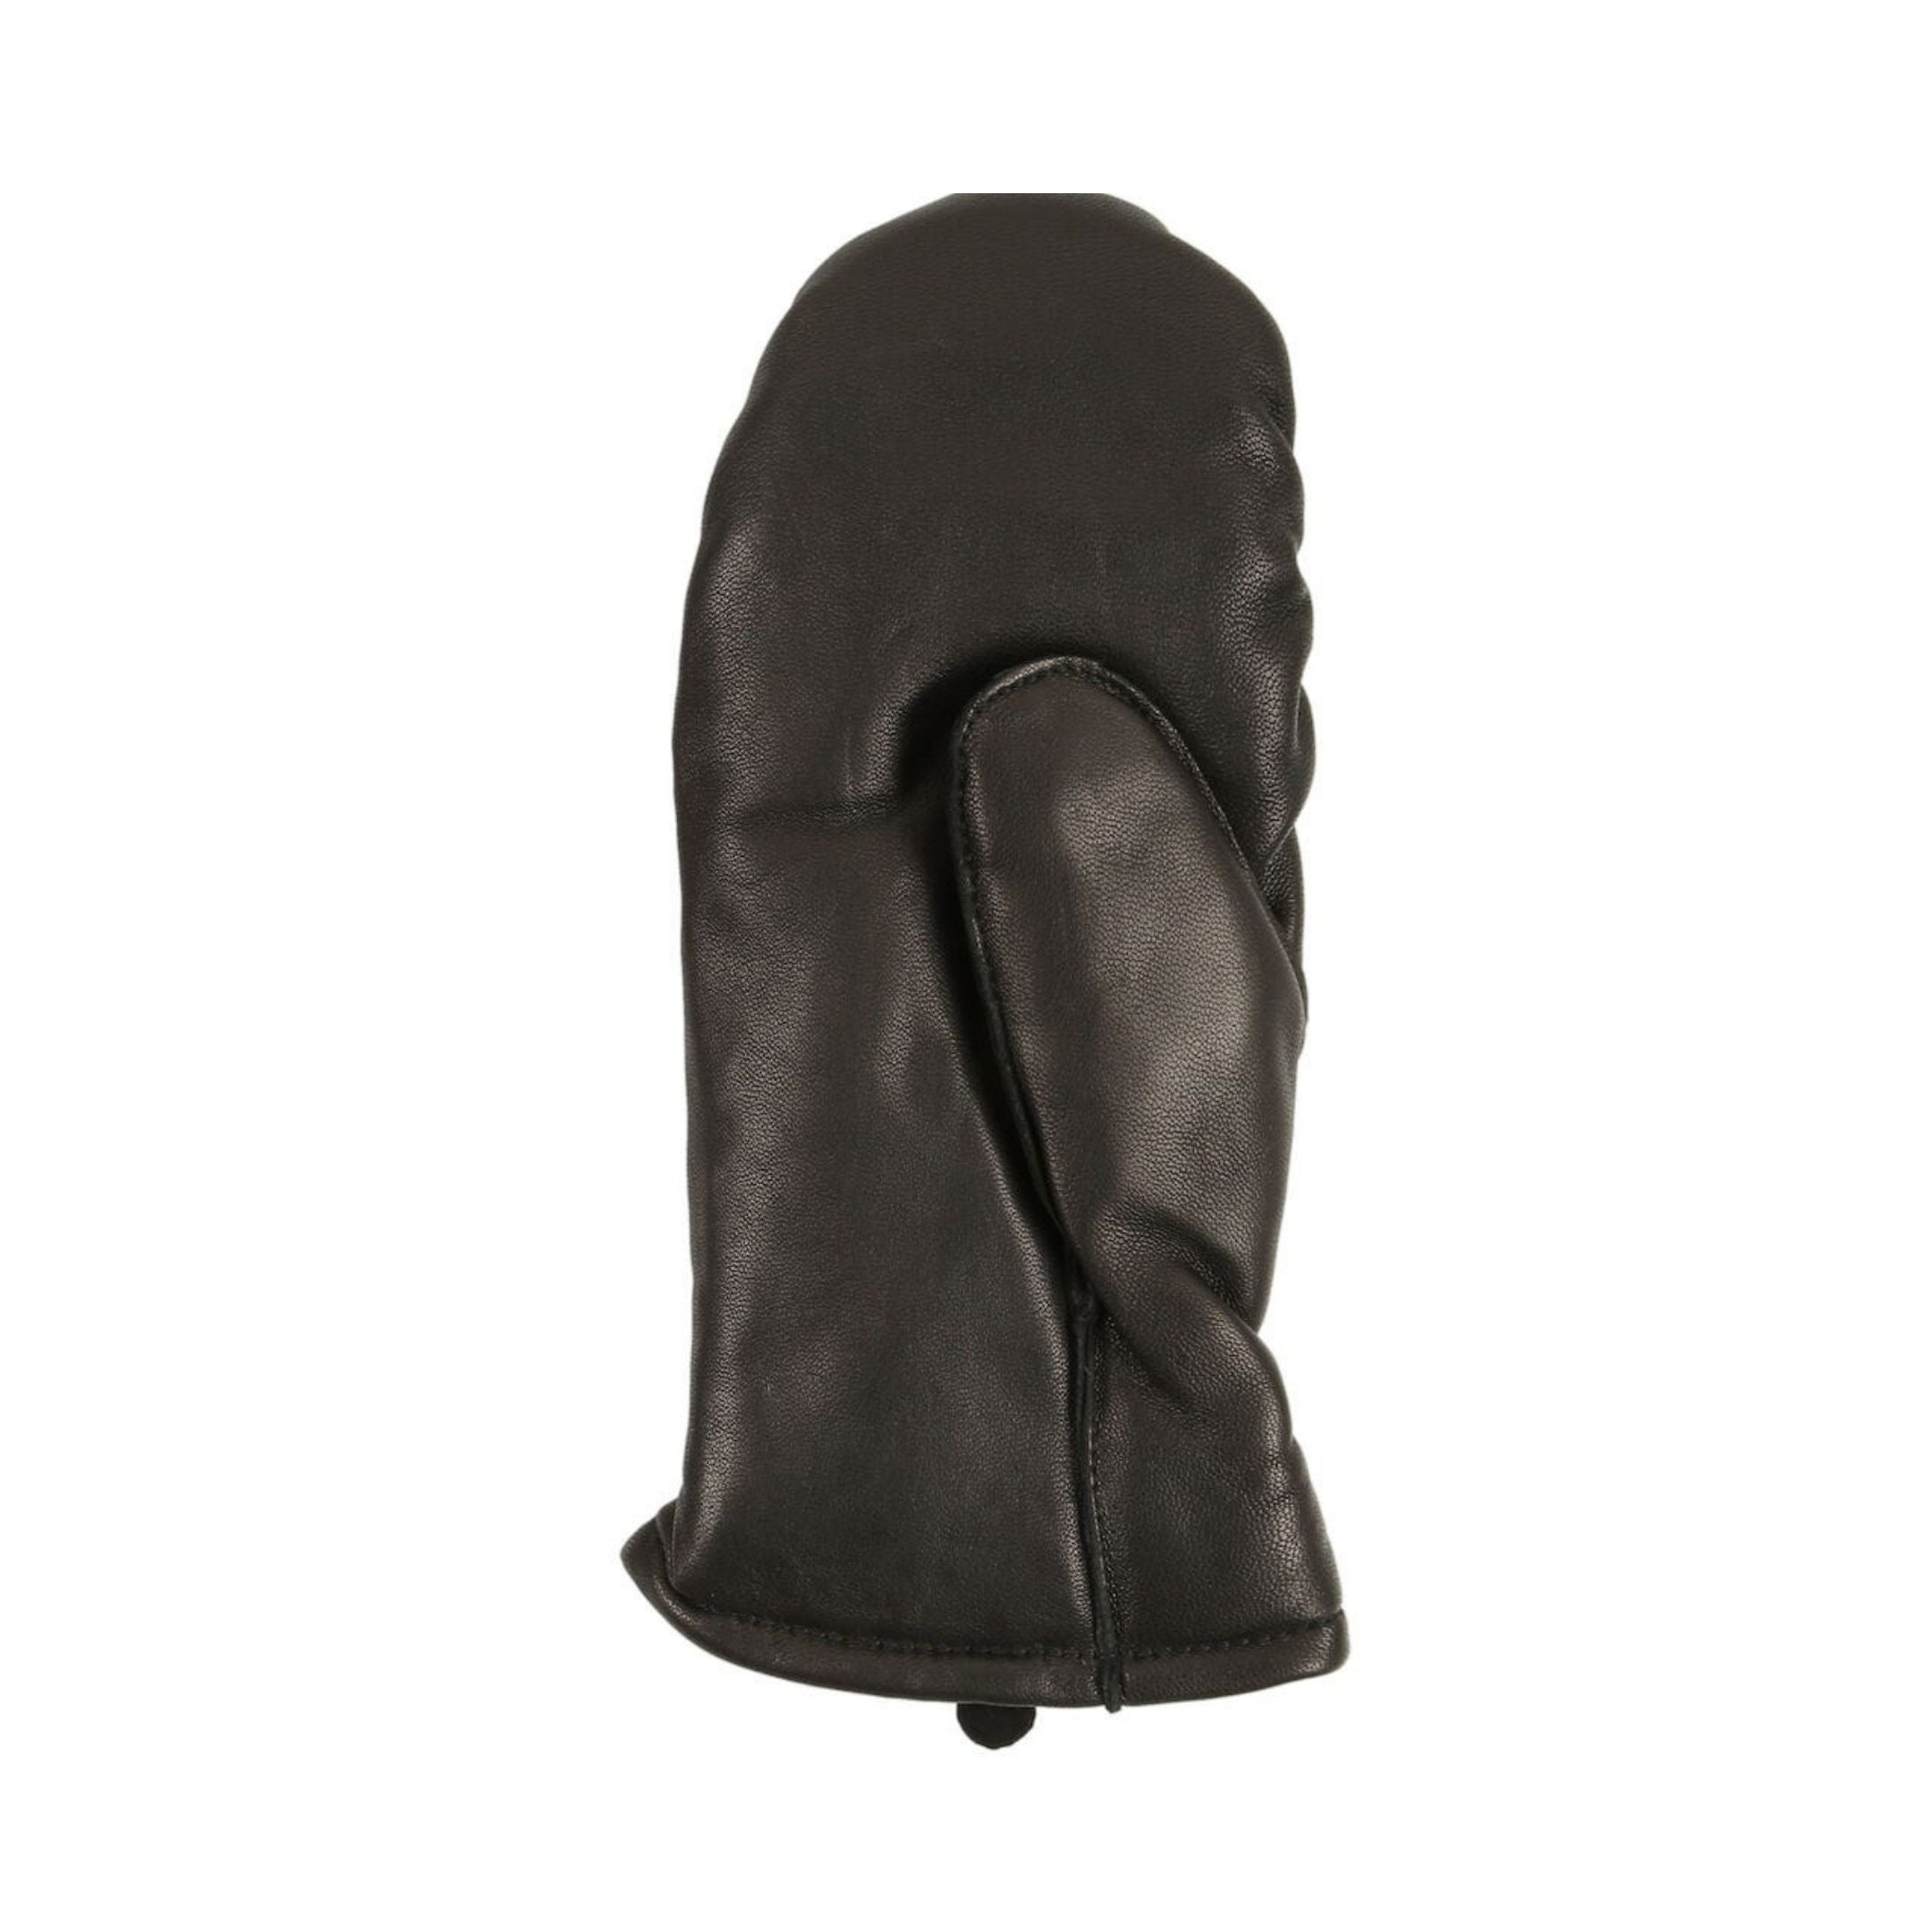 Palm side view of black leather mittens. 